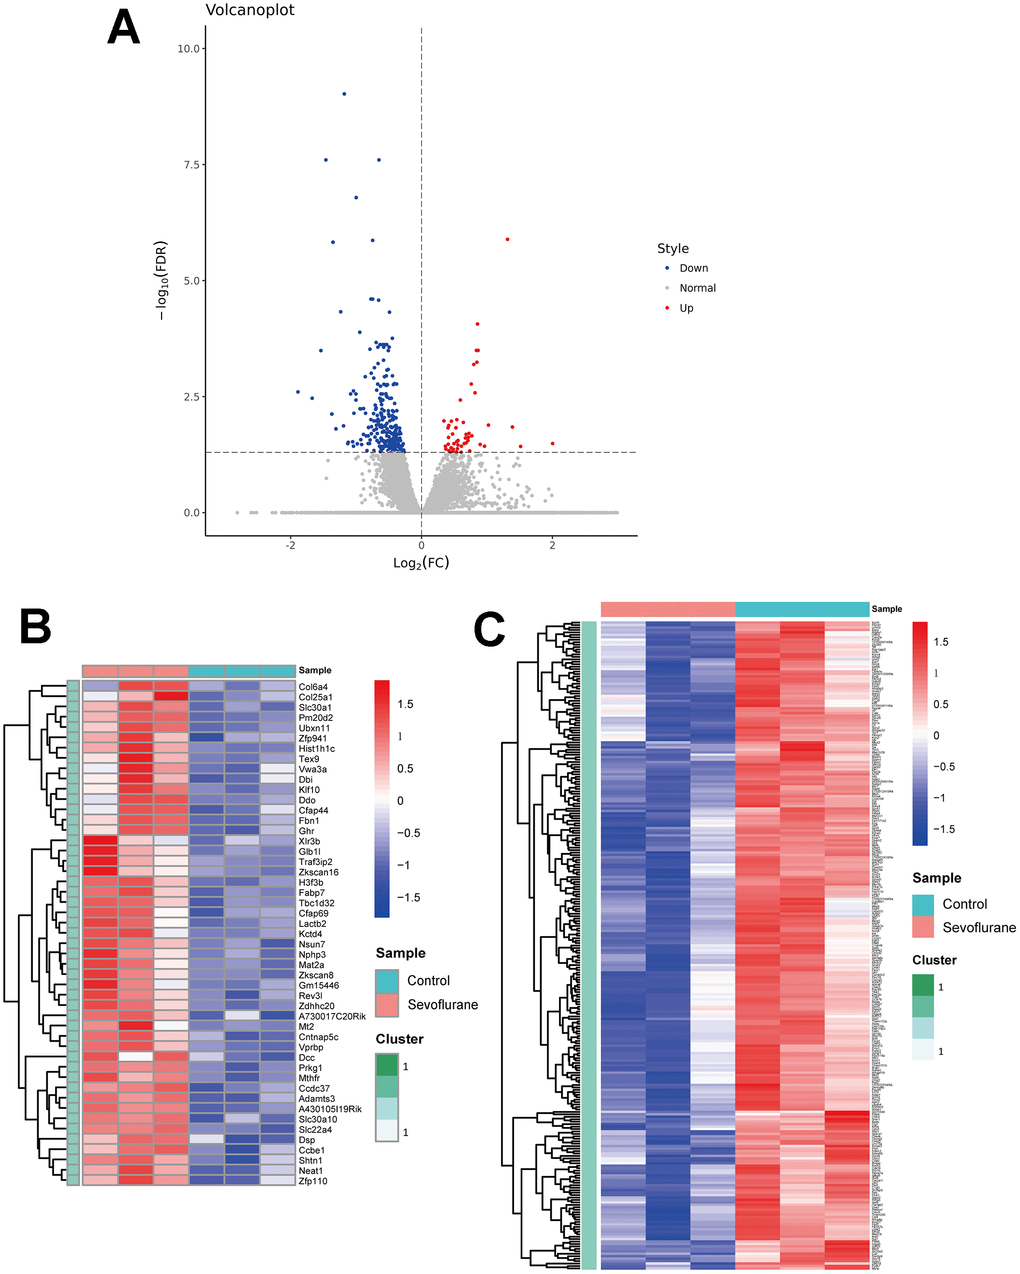 Volcano plot and heatmaps of DEGs in hippocampal tissues between sevoflurane-treated and control mice. (A) Volcano plot showing up-regulated (red dots) and down-regulated (blue dots) DEGs and normally expressed genes (gray dots). (B) Heatmap of 49 up-regulated DEGs. (C) Heatmap of 265 down-regulated DEGs.